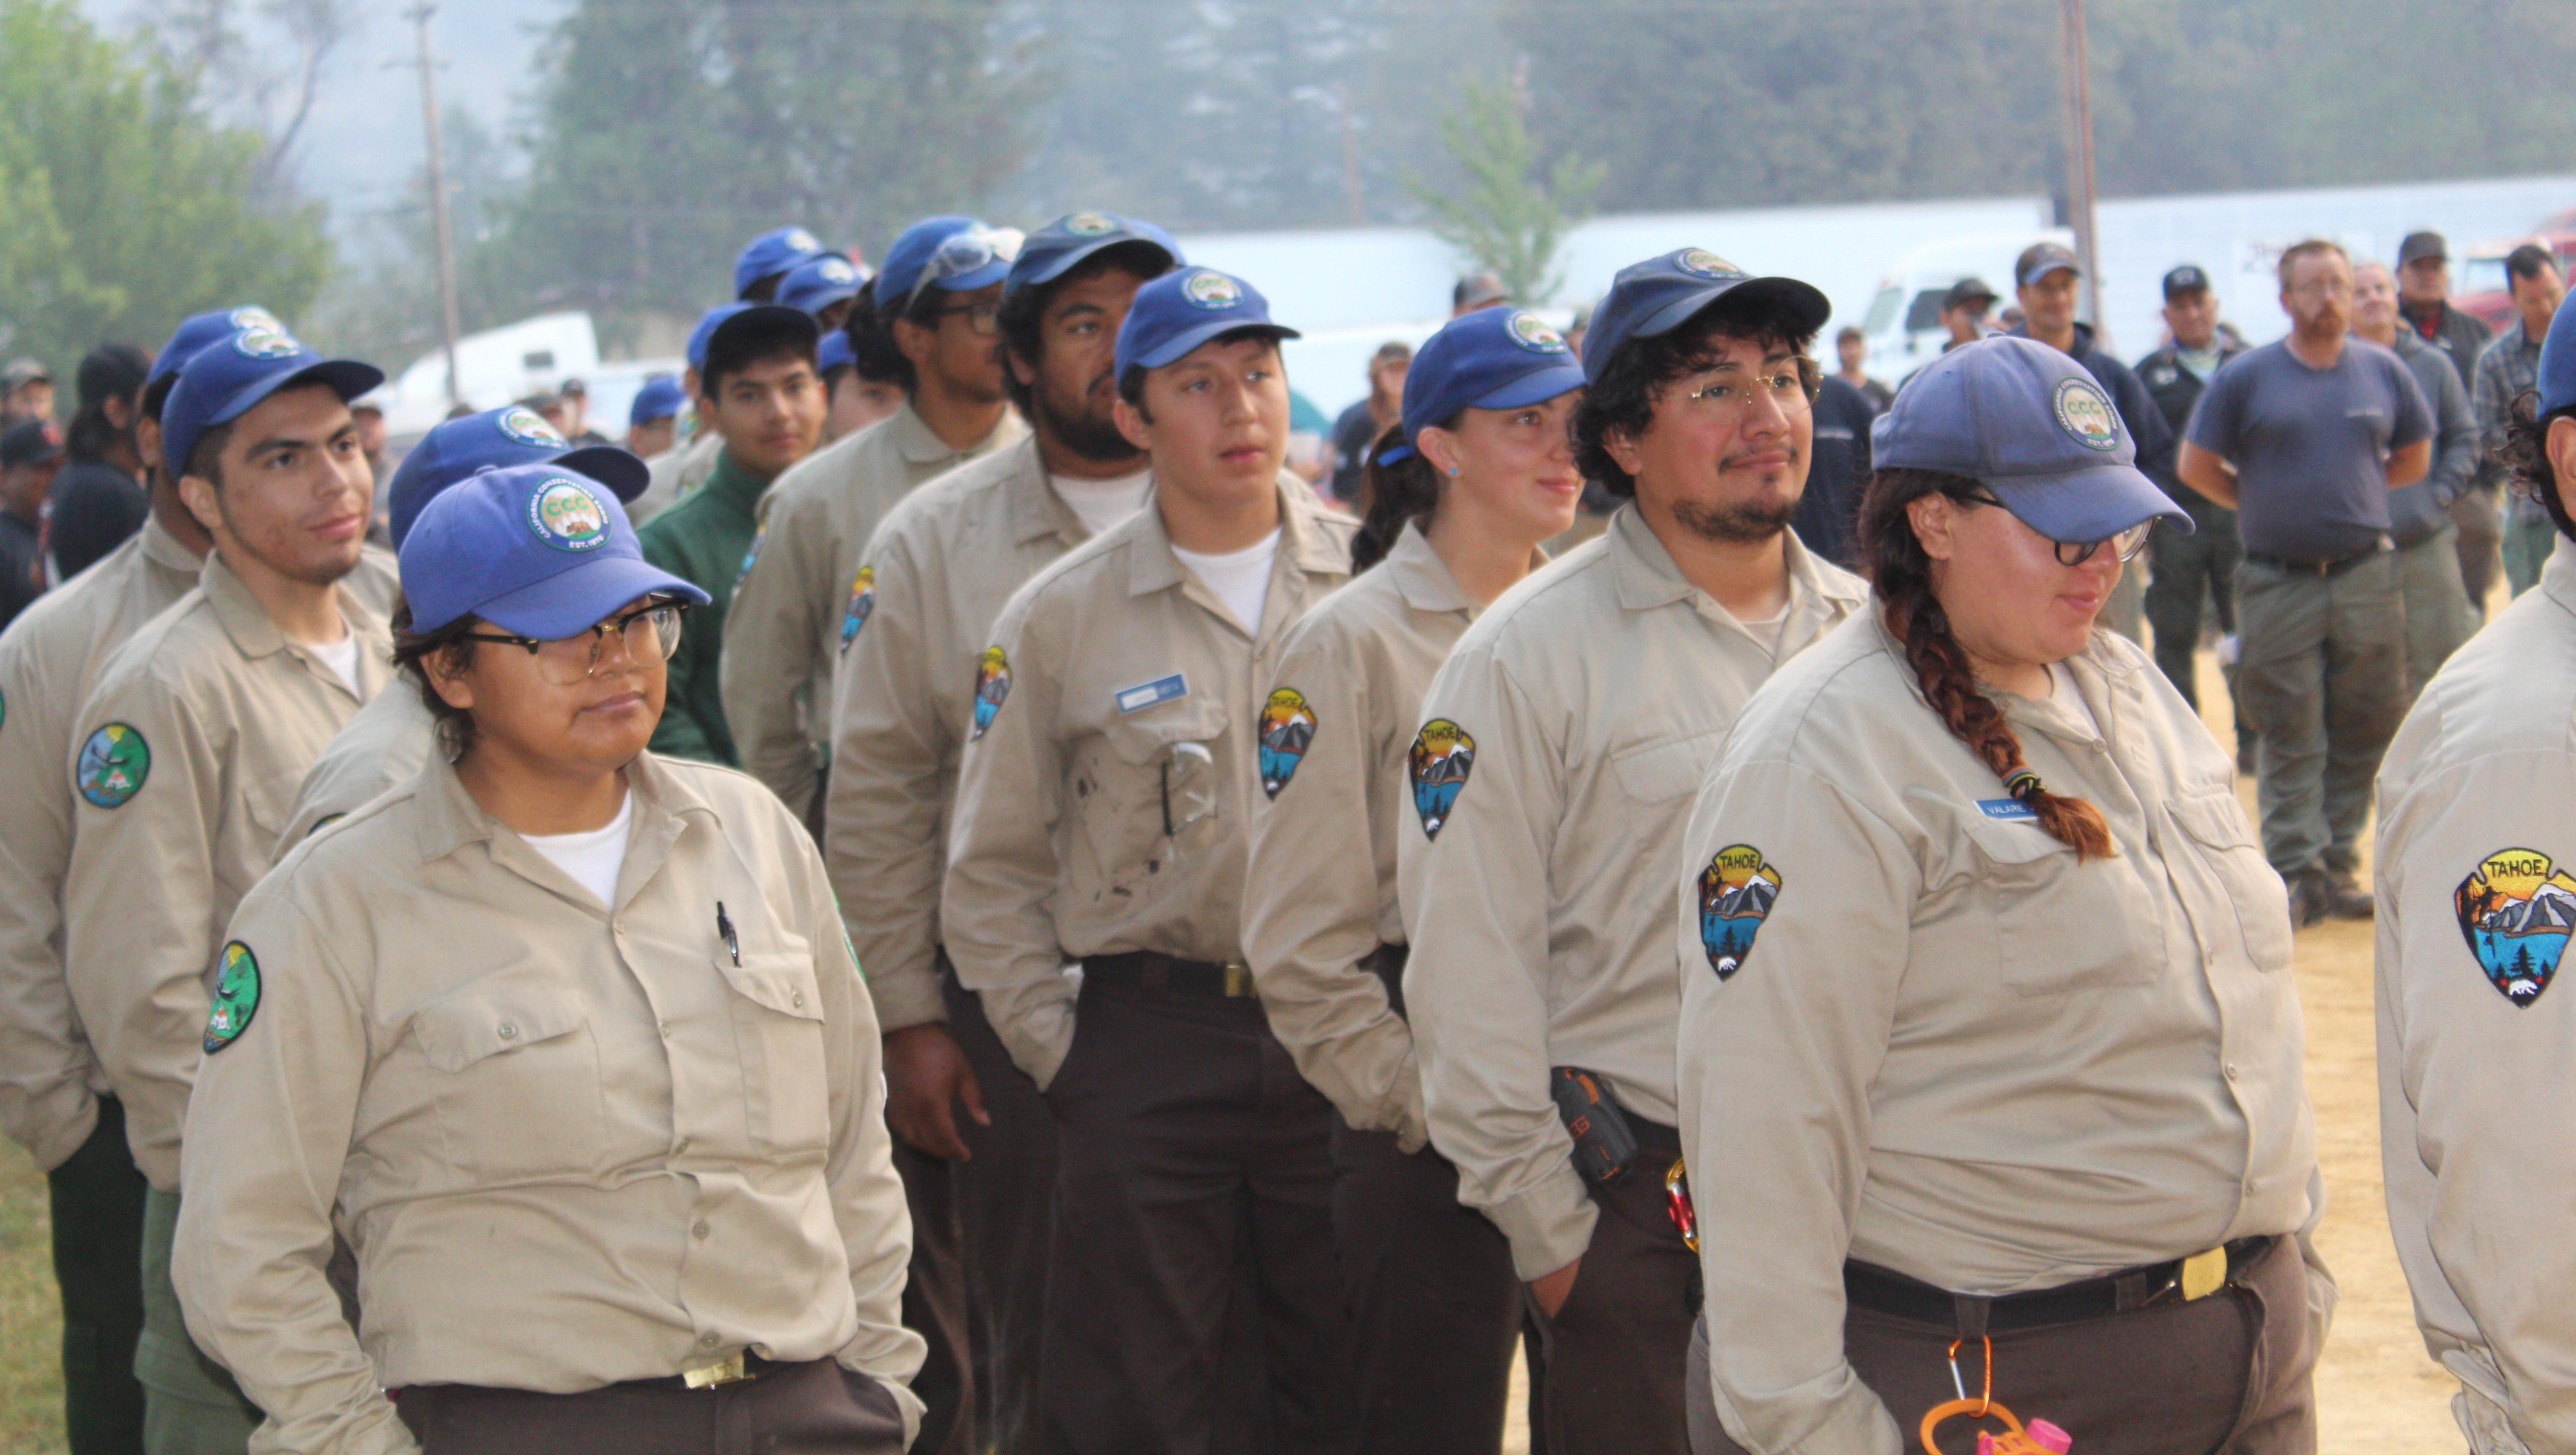 Young men and women in tan shirts and blue hats standing in an orderly group